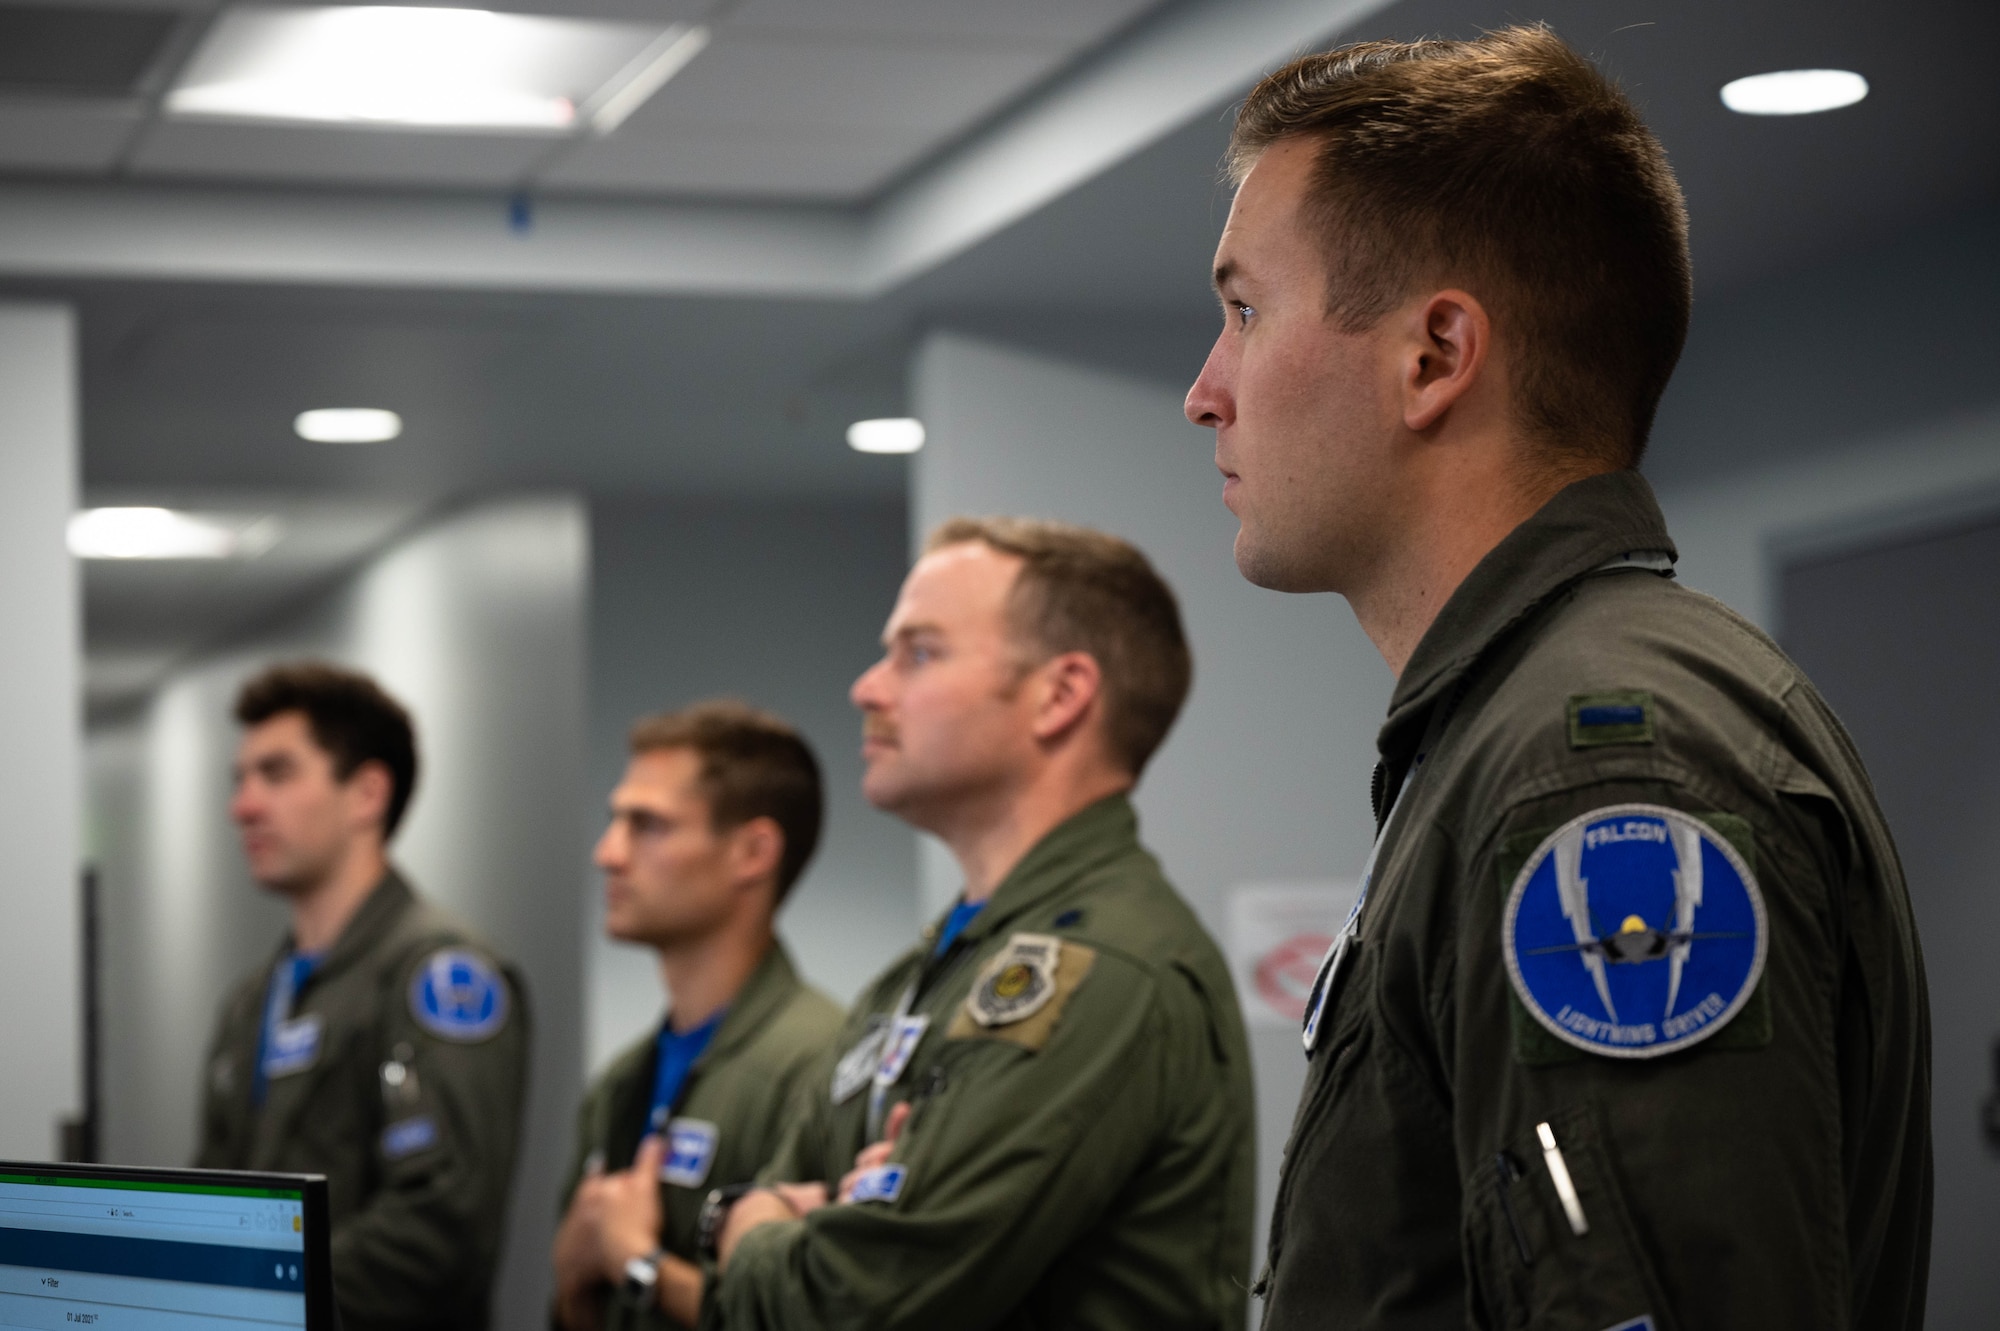 U.S. Air Force pilots assigned to the 355th Fighter Squadron (FS) attend a preflight briefing on Eielson Air Force Base, Alaska, July 1, 2021.